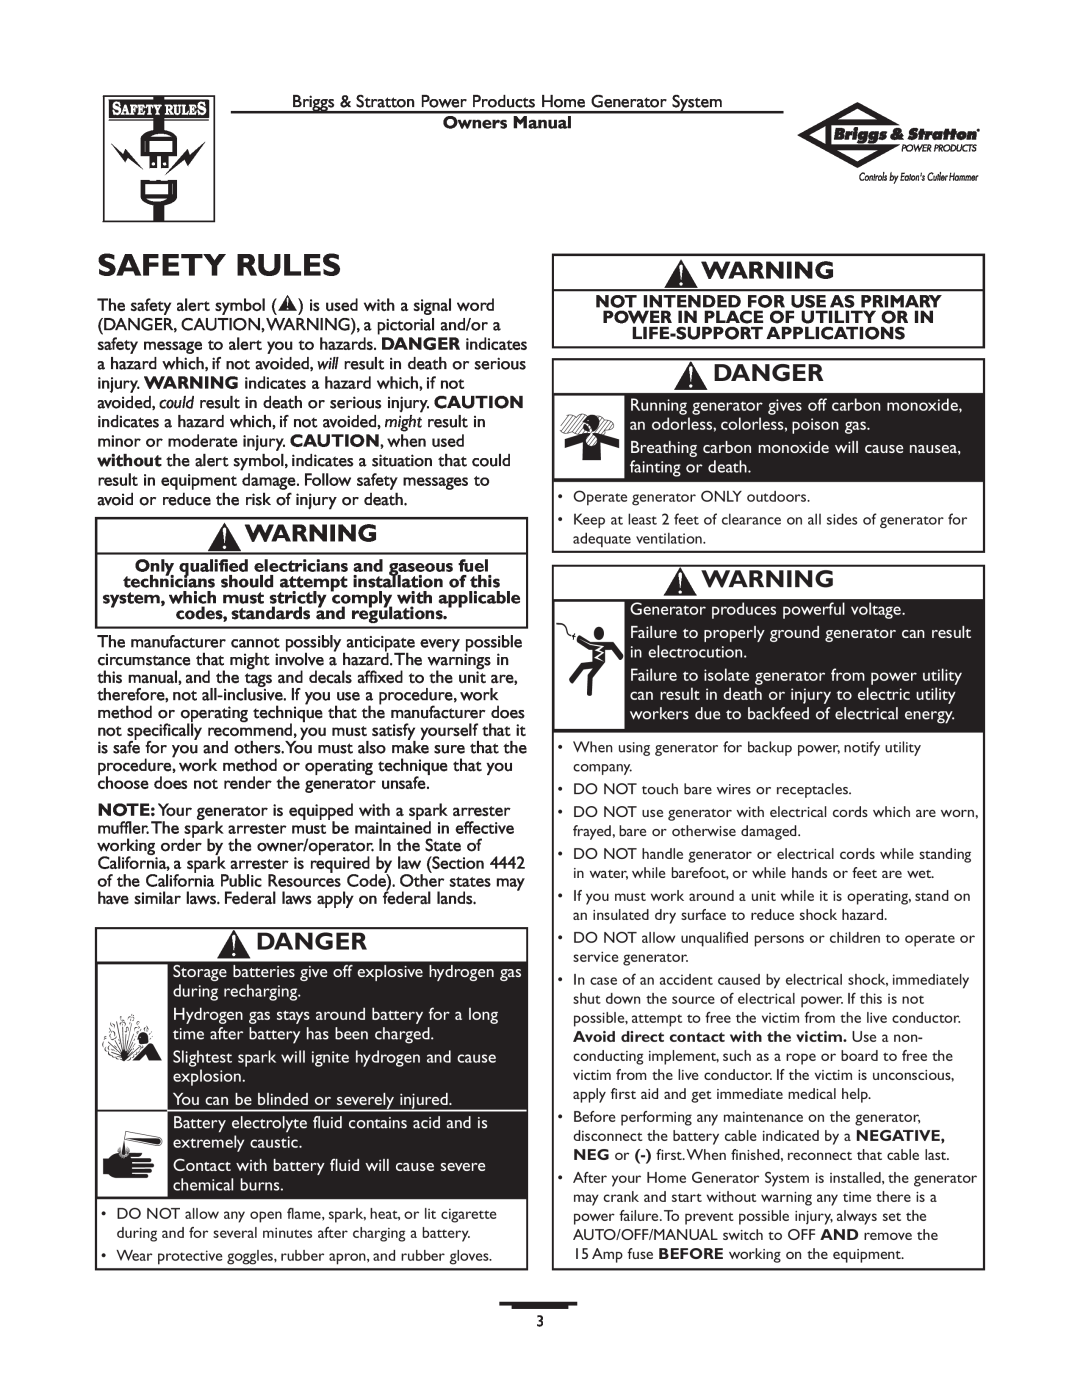 Briggs & Stratton 1679-0 owner manual Safety Rules, Danger, Owners Manual 